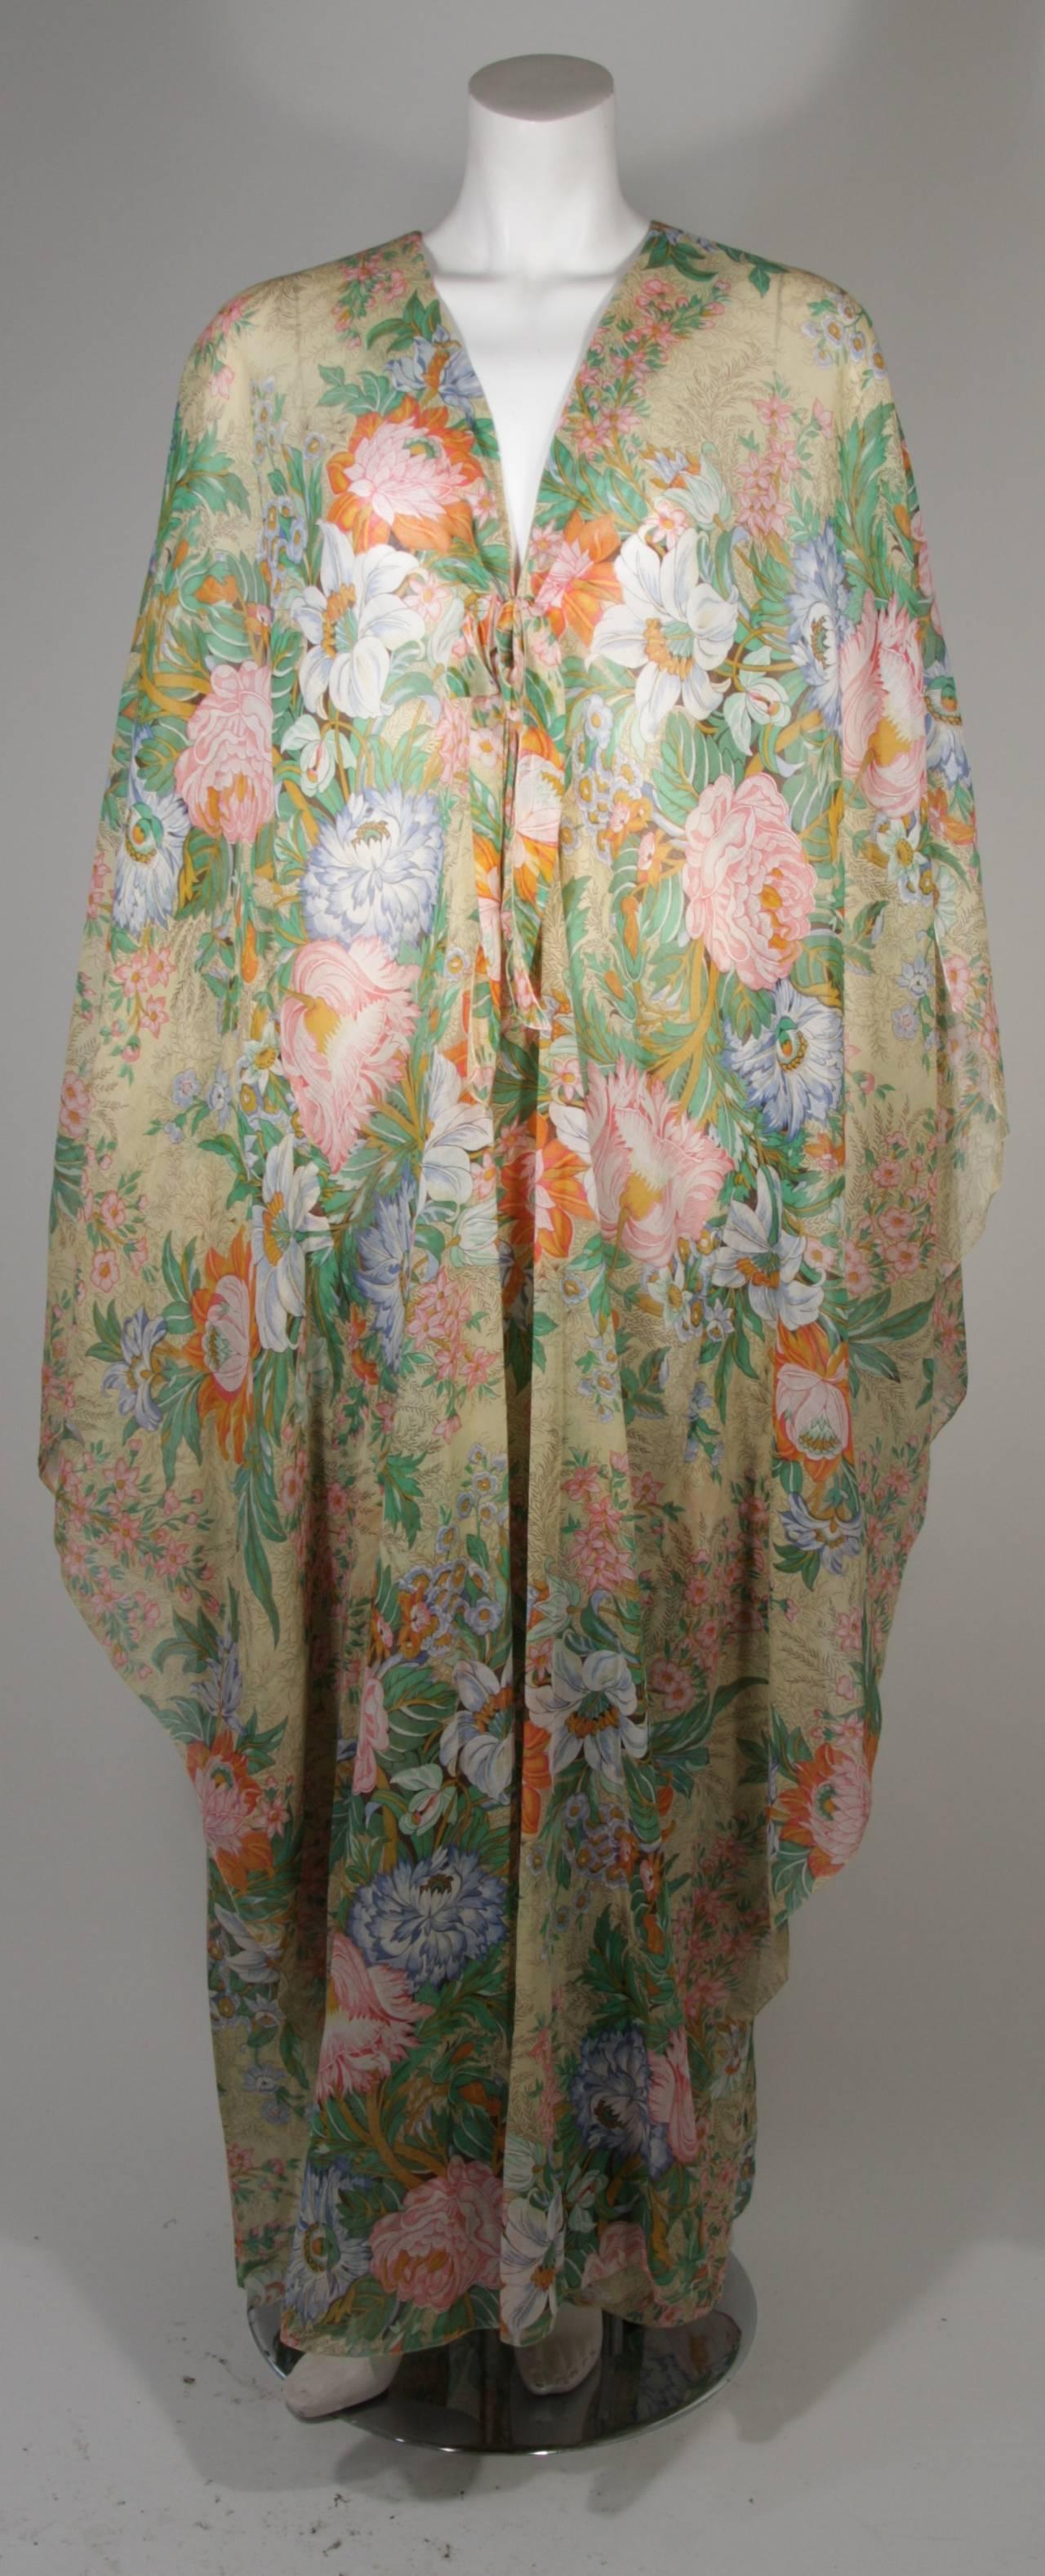 This Lucie Ann kaftan is composed of a lightweight cotton featuring a floral motif in melodic hues of brown, nude, orange, and green. An absolutely wonderful textile print of blooming flowers. In excellent condition. There is a center front tie at